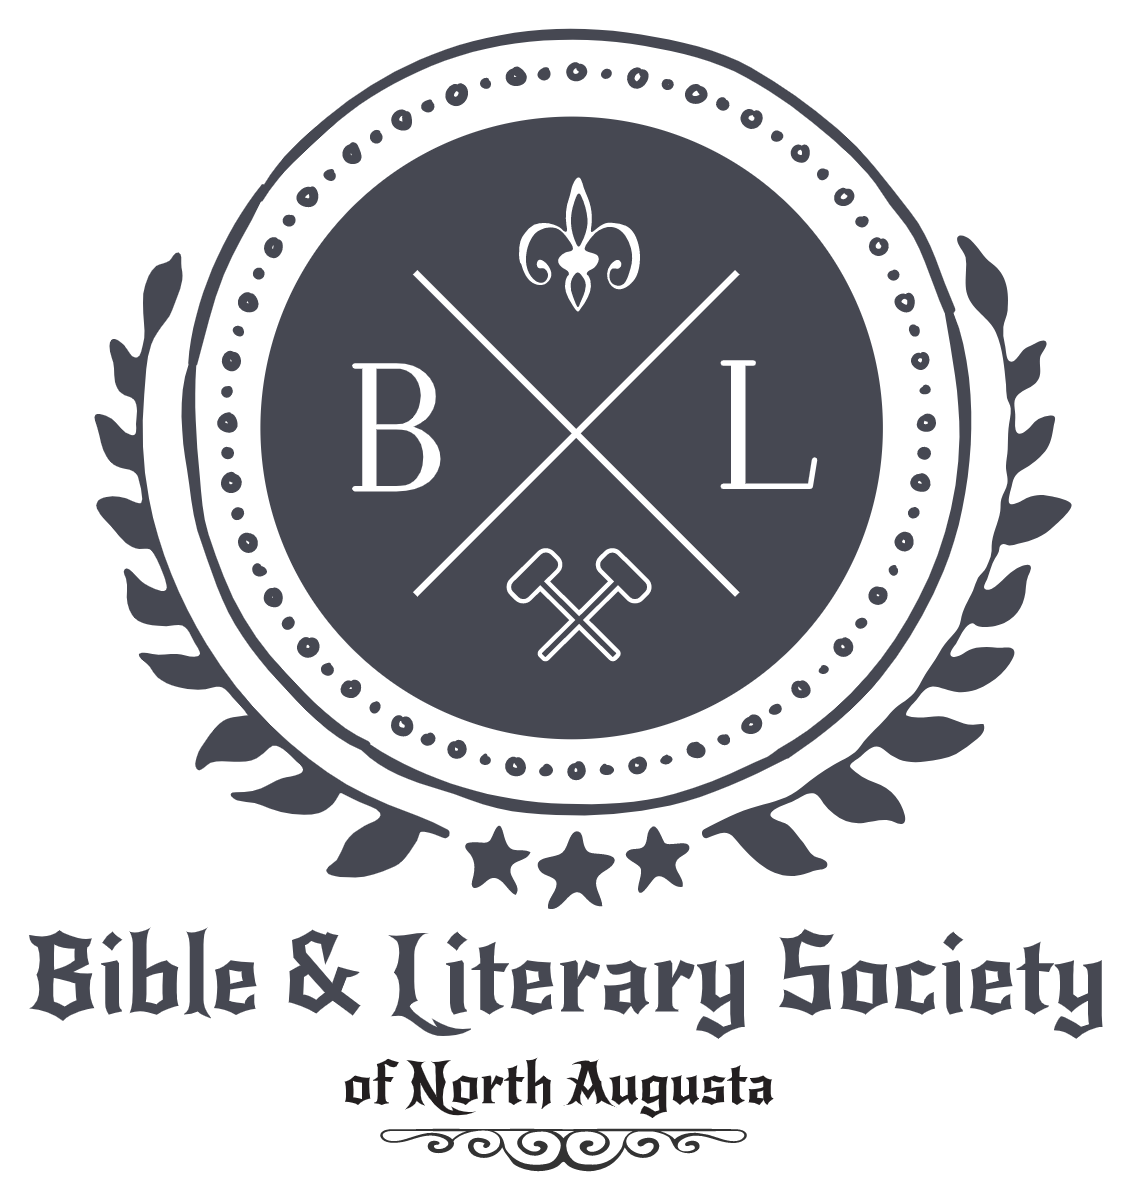 Bible & Literary Society of North Augusta